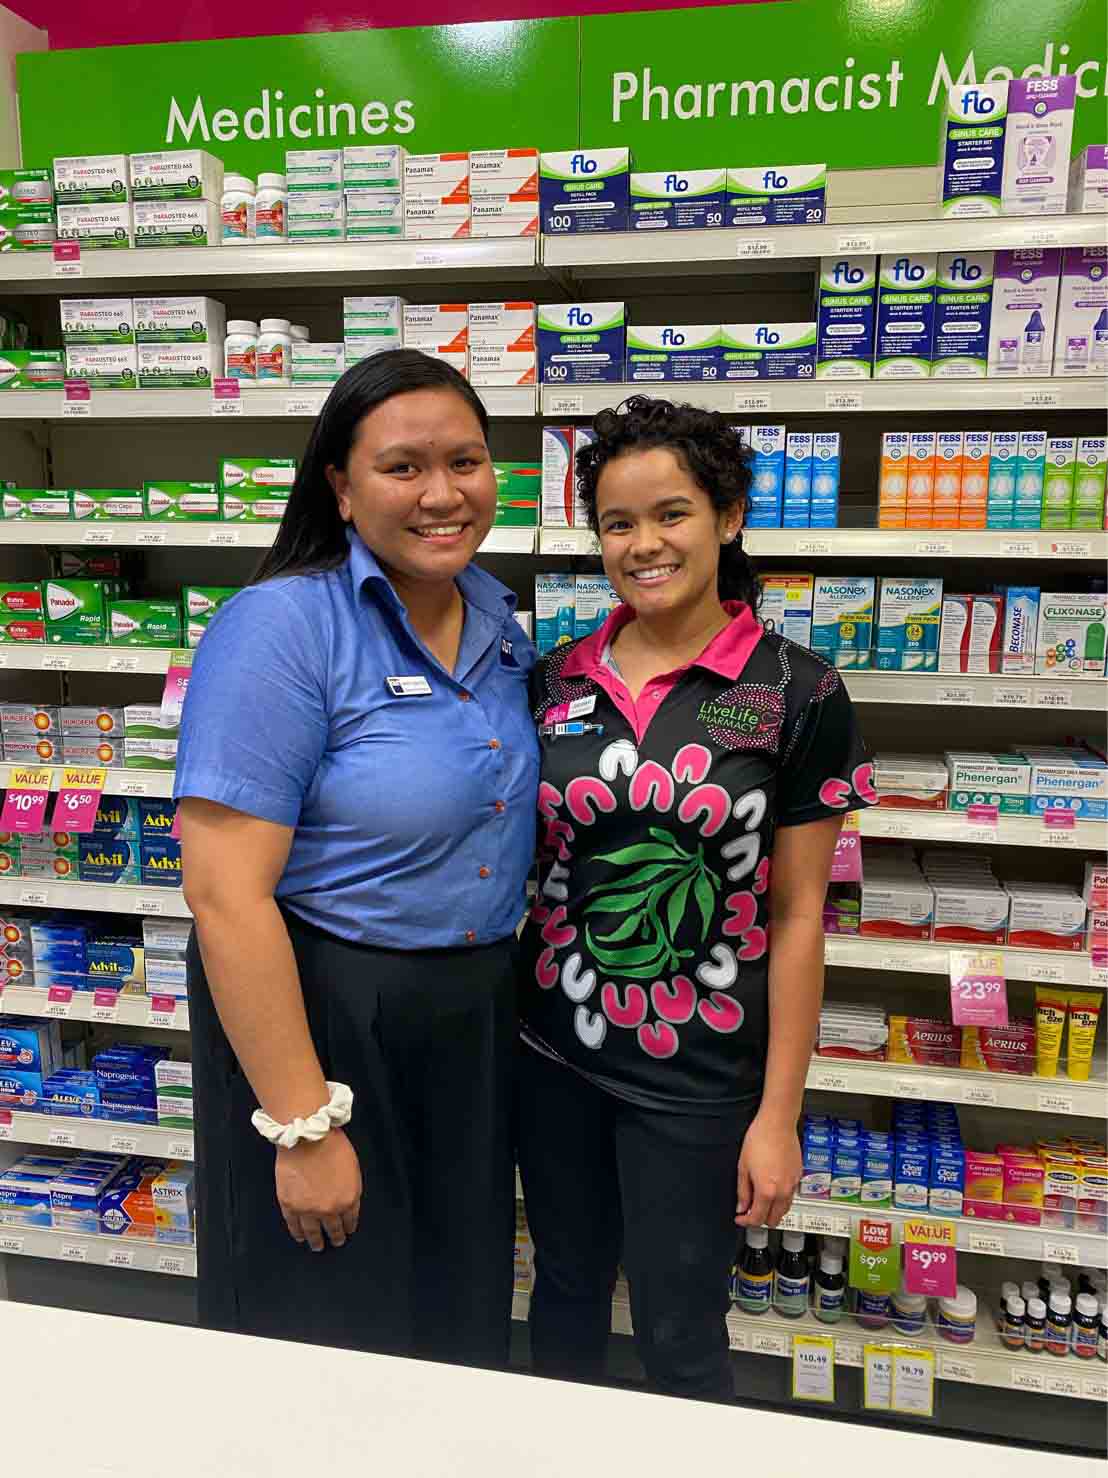 Two smiling women in pharmacy uniforms stand in front of a wall of medication